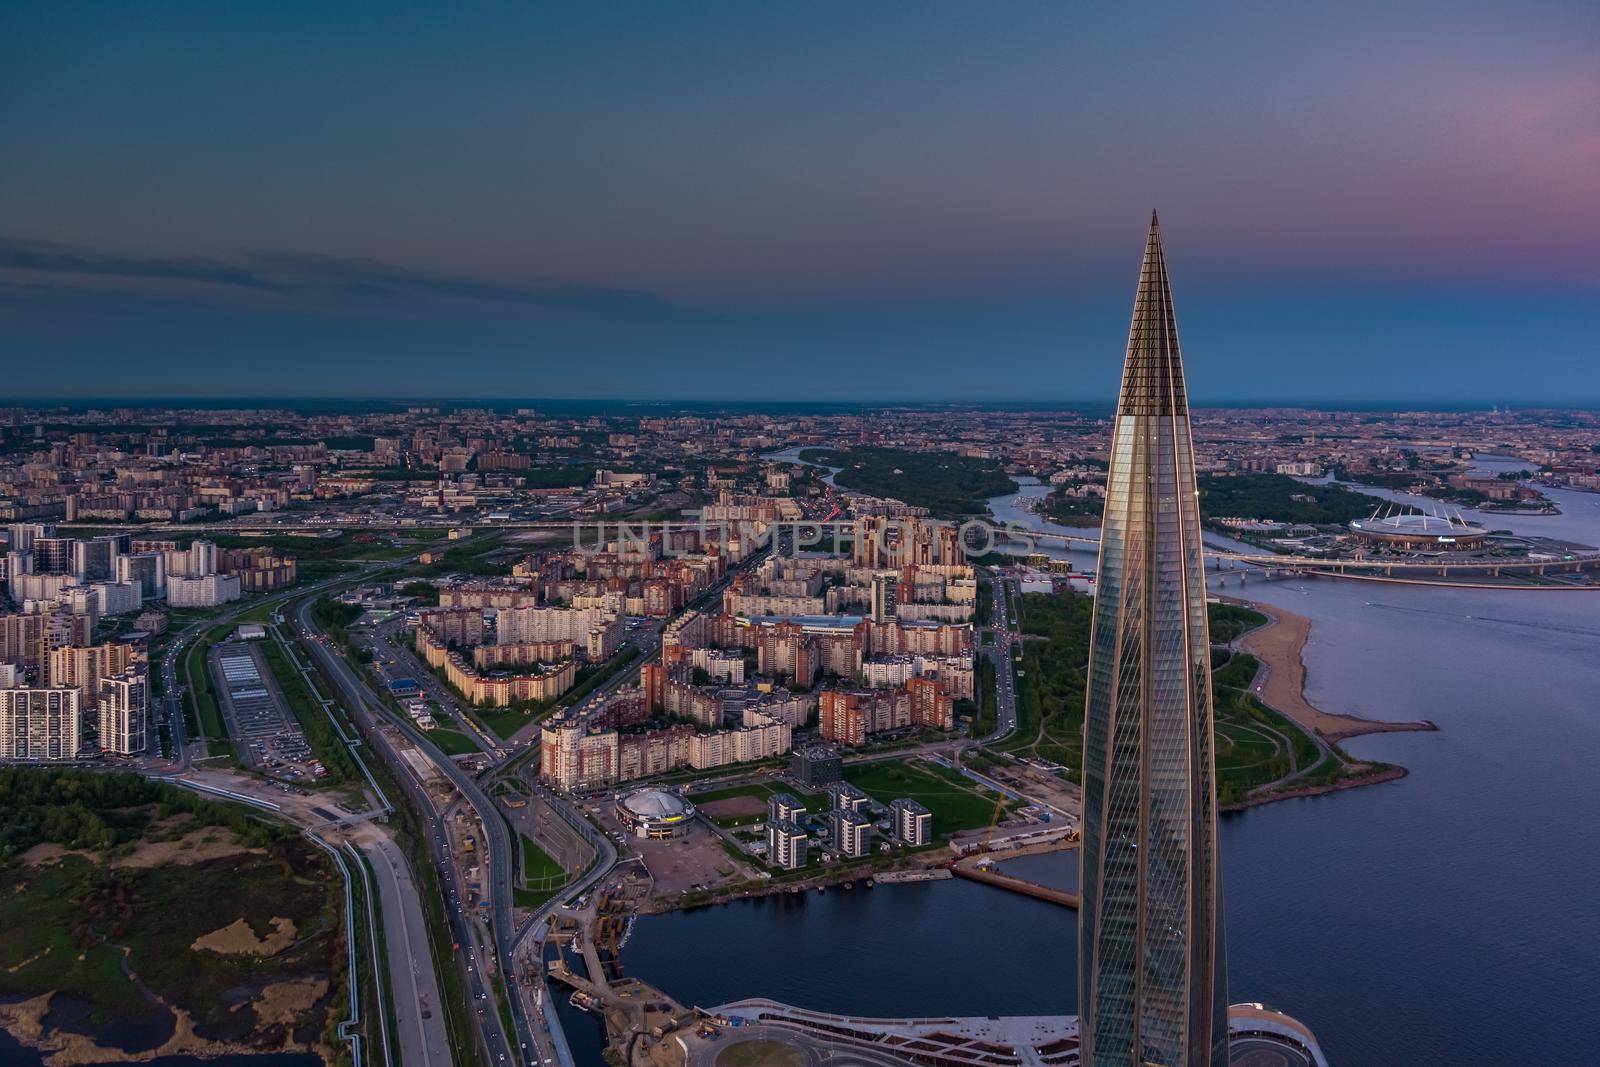 Russia, St.Petersburg, 16 May 2021: Drone point of view of highest skyscraper in Europe Lakhta Center at pink sunset, Headquarters of the oil company Gazprom, stadium Gazprom Arena on background. High quality photo